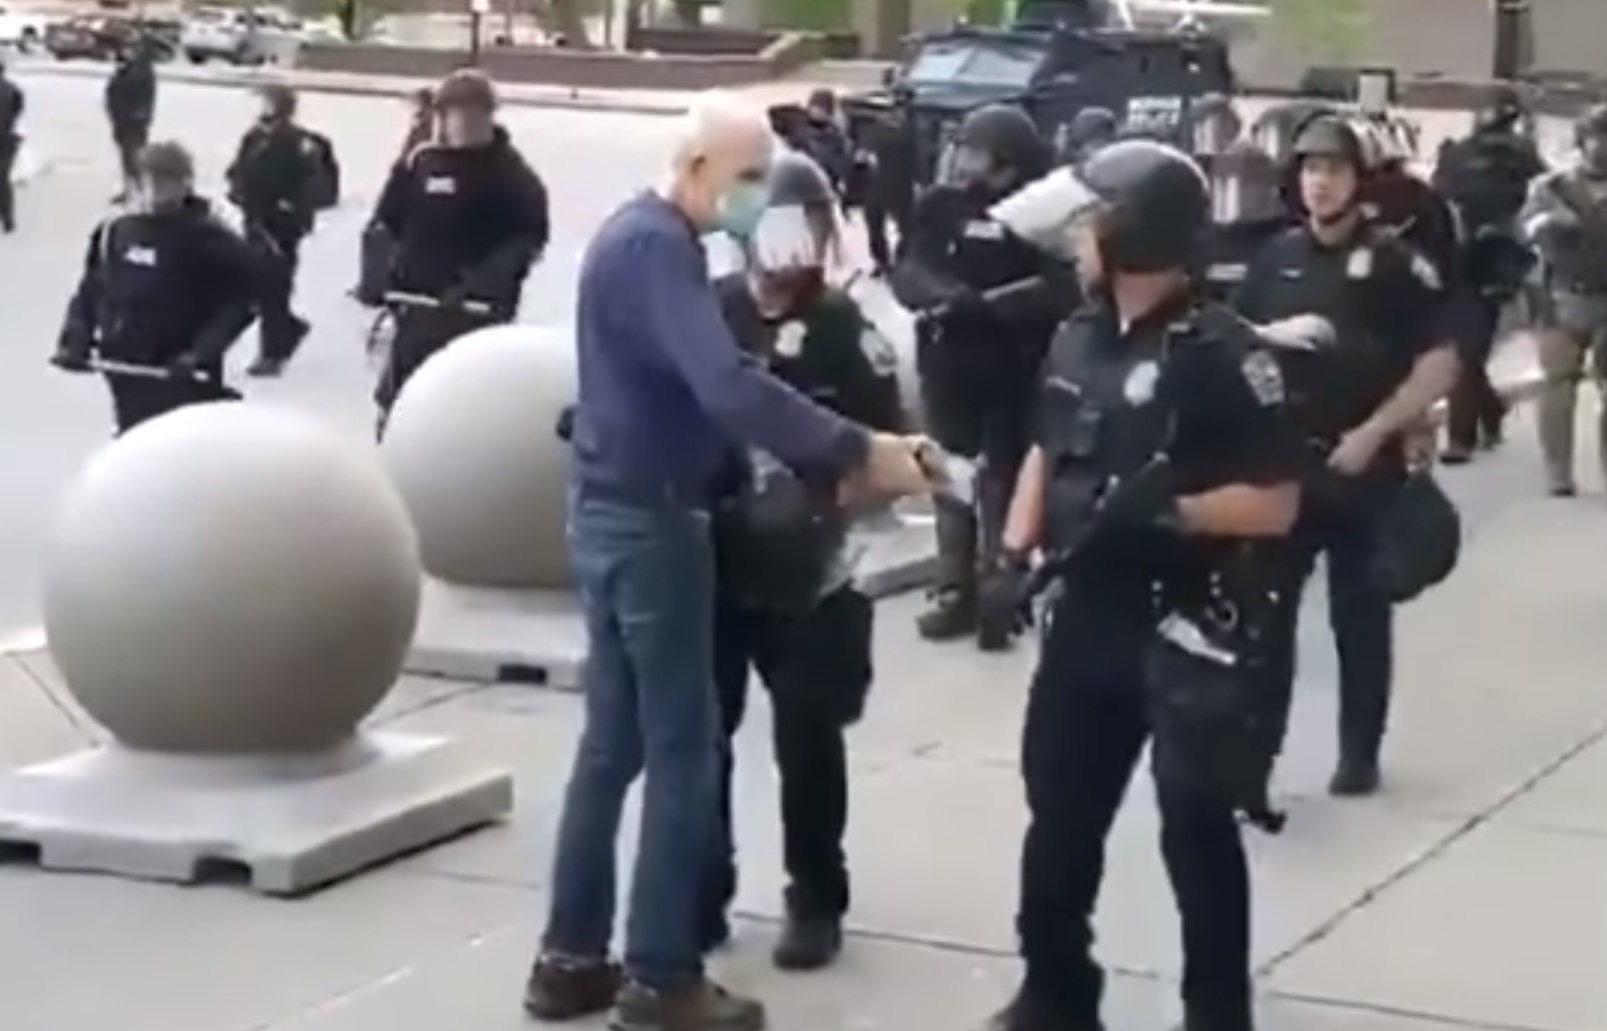 Image: NARRATIVE COLLAPSE: “Old man” who was “shoved” by police was actually a left-wing AGITATOR skimming police radio frequencies to run information warfare tactics against law enforcement